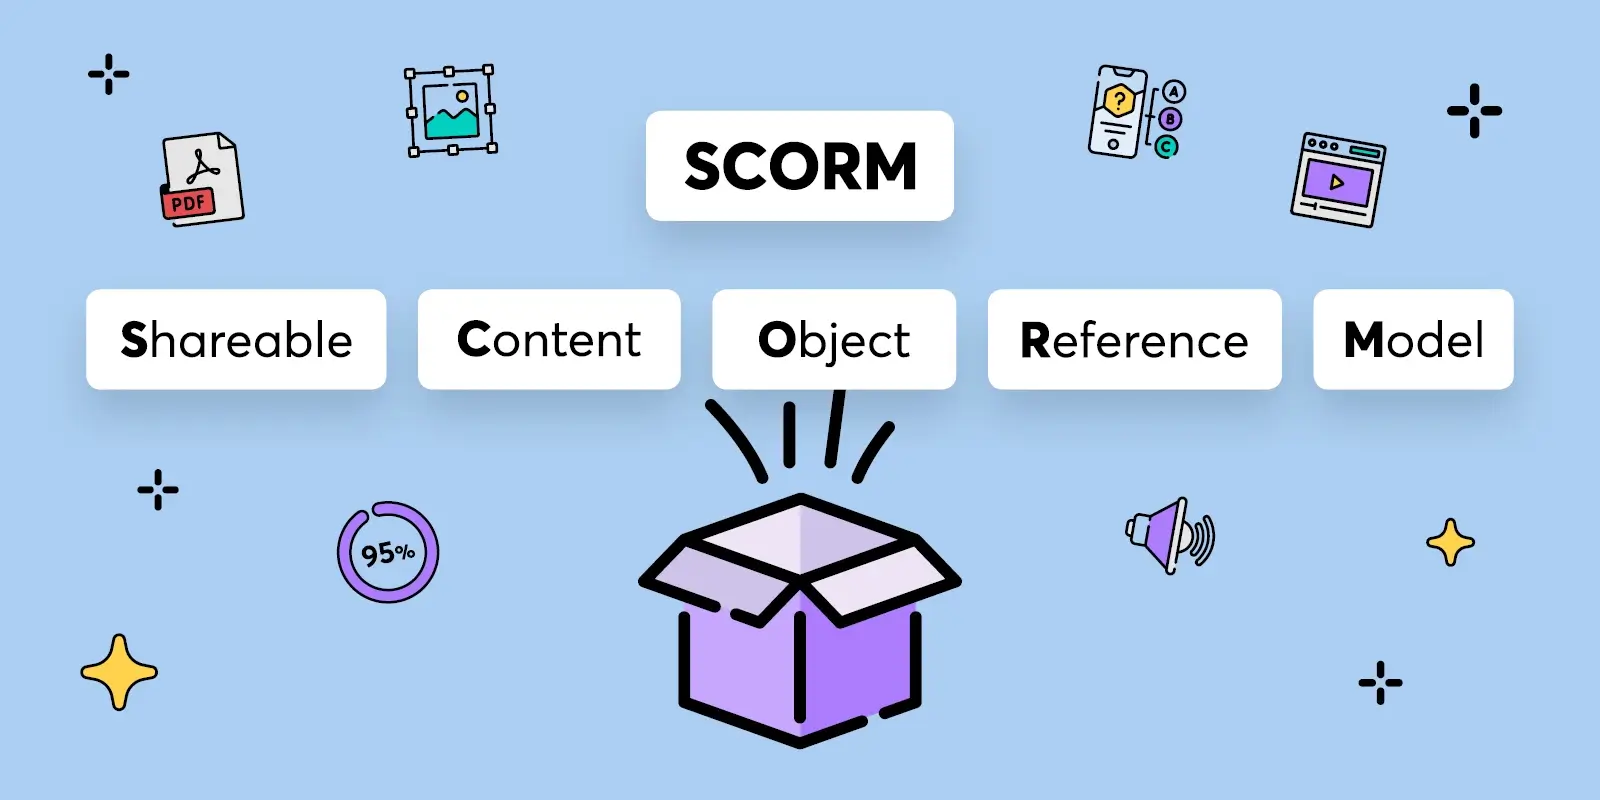 SCORM stands for Shareable Content Object Reference Model.